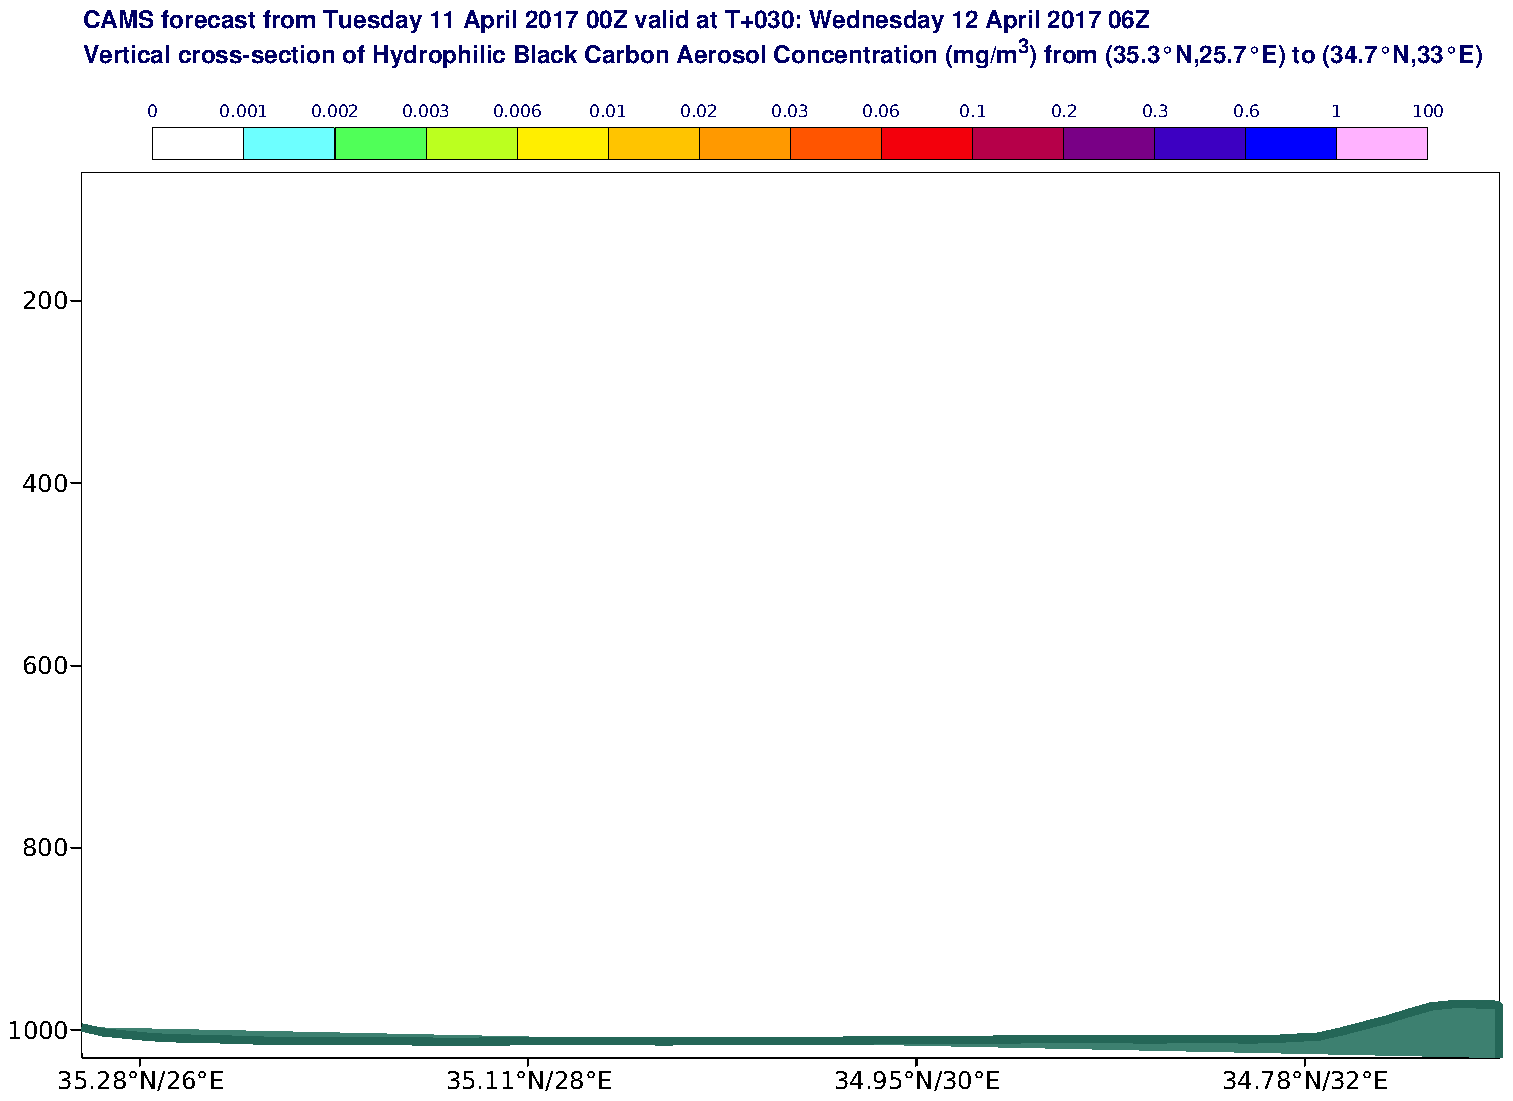 Vertical cross-section of Hydrophilic Black Carbon Aerosol Concentration (mg/m3) valid at T30 - 2017-04-12 06:00